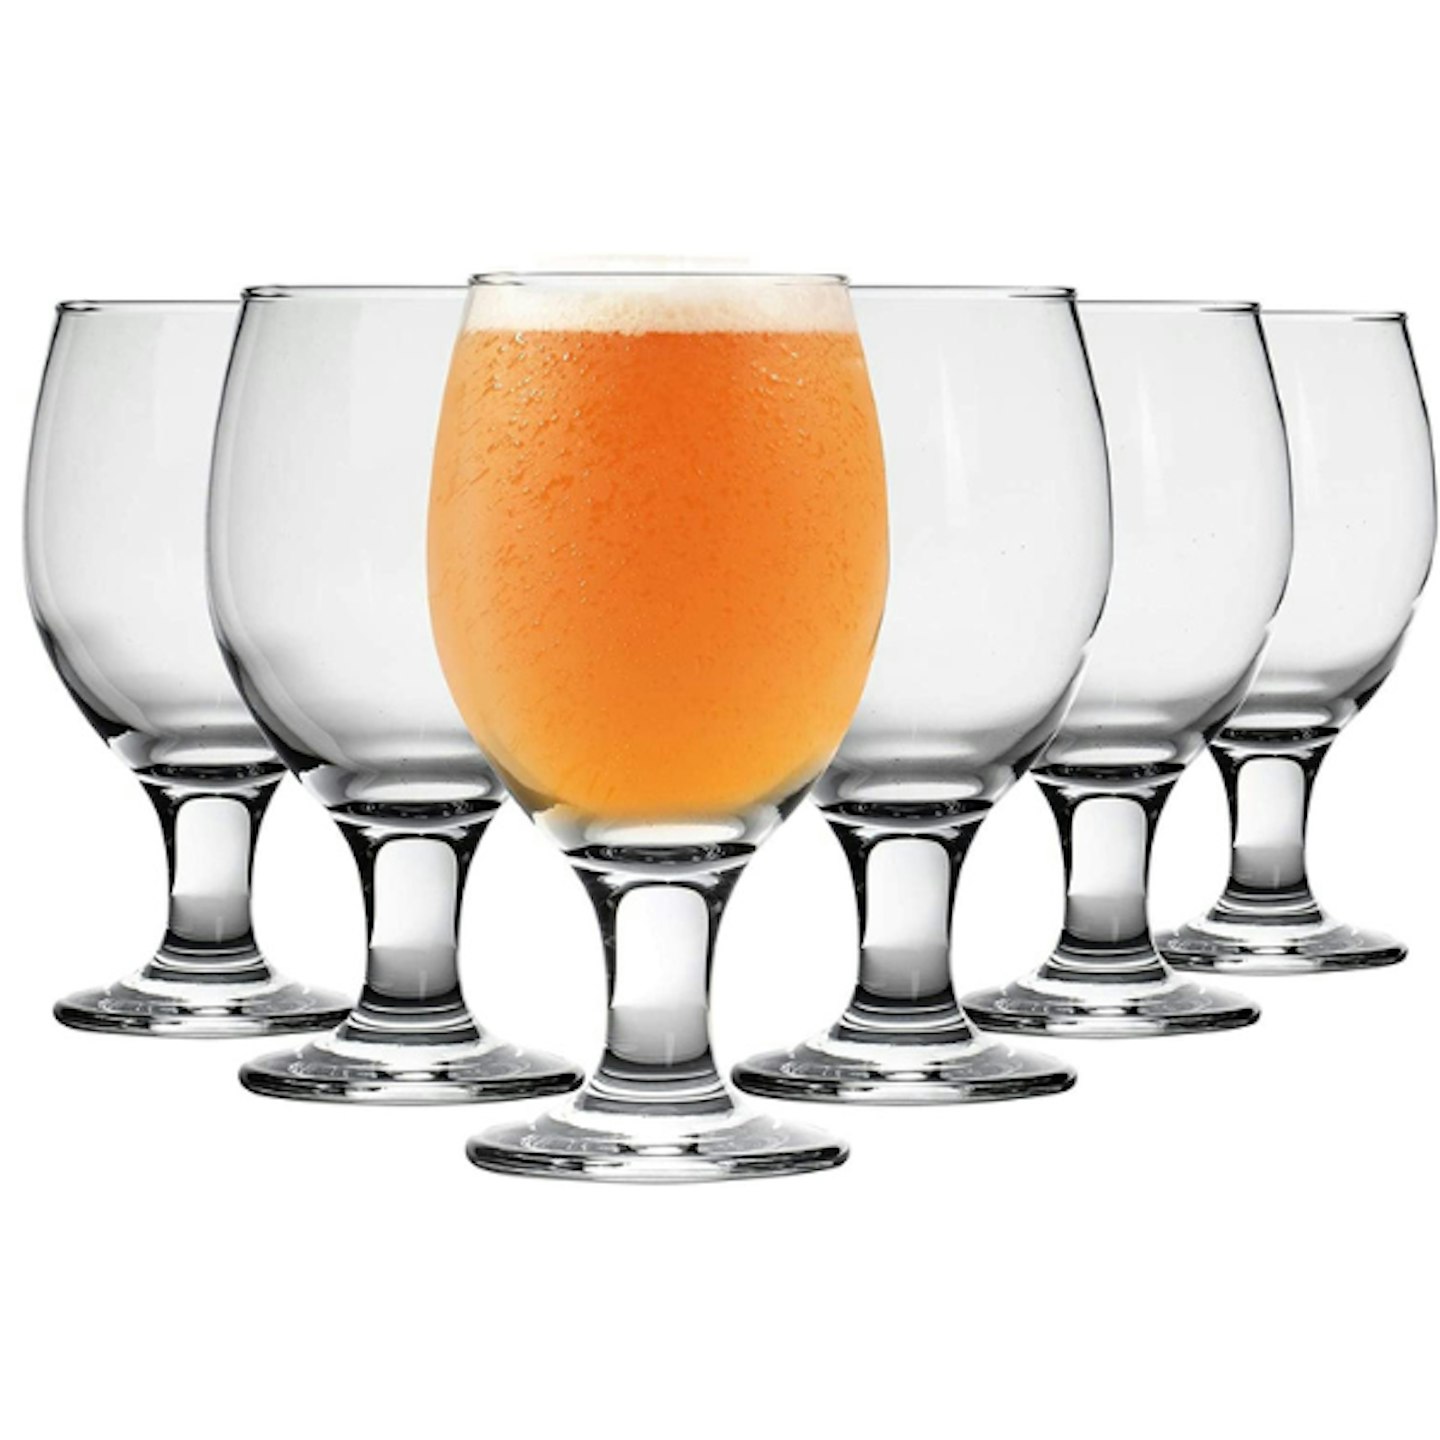 Rink Drink Snifter Beer Glasses - Tulip Style